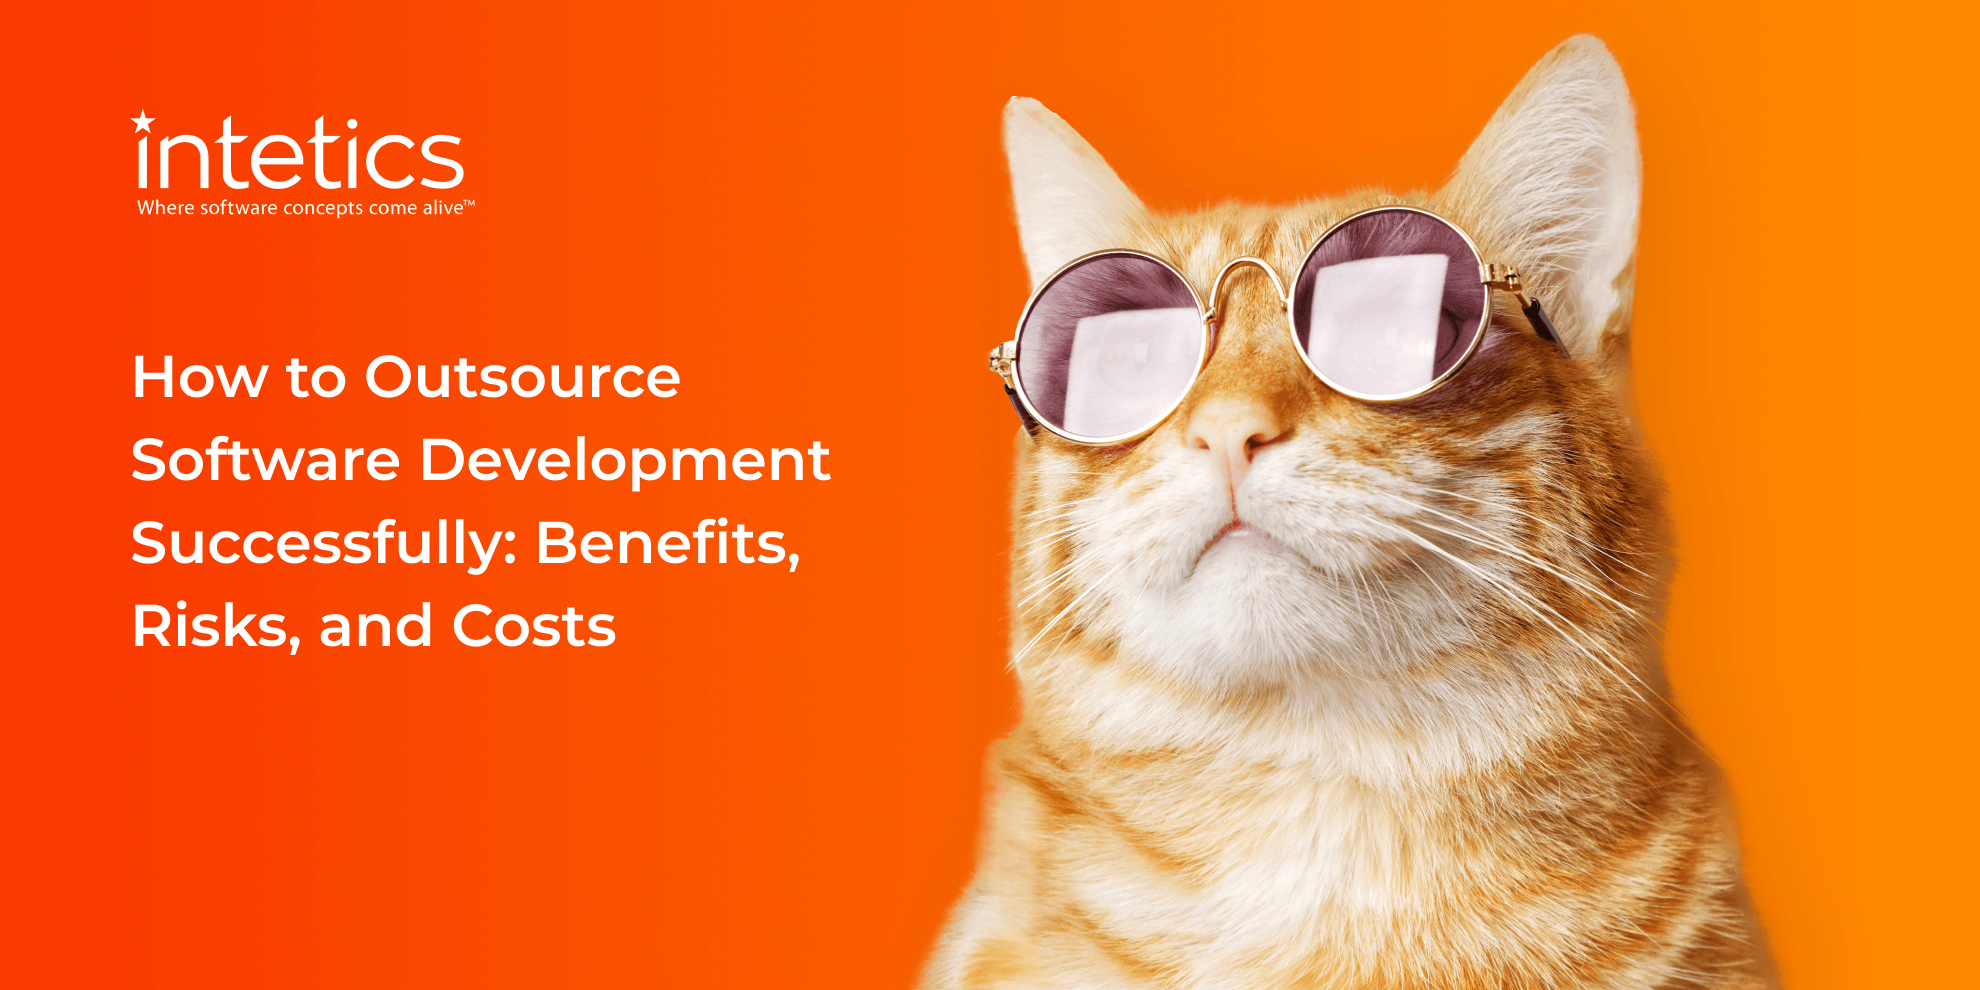 How to Outsource Software Development: A Comprehensive Guide